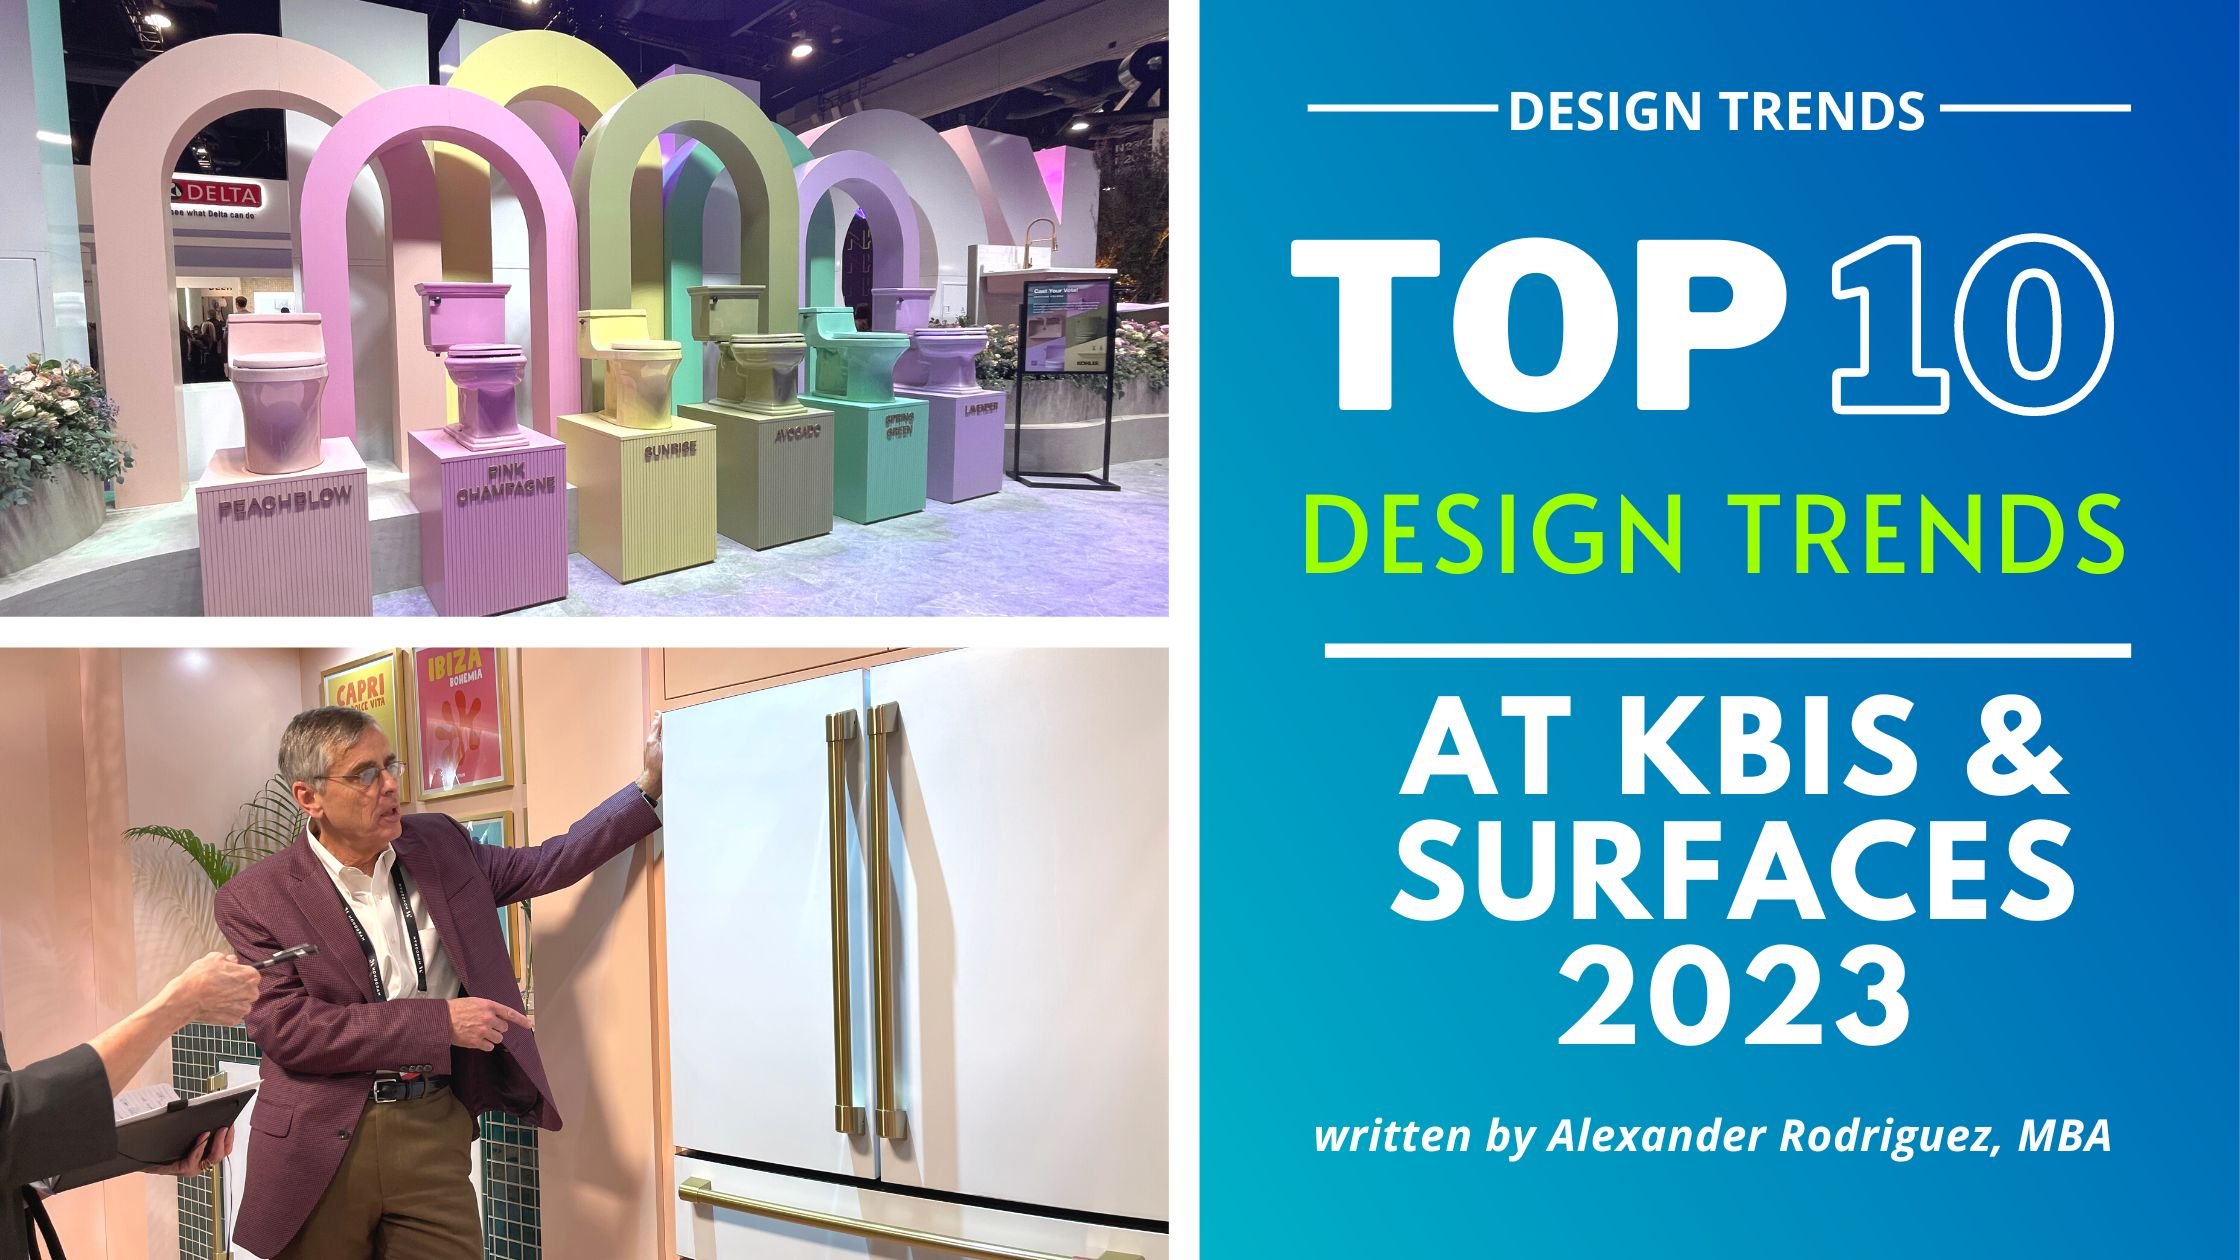 Thumb - Top Trends - KBIS 2023